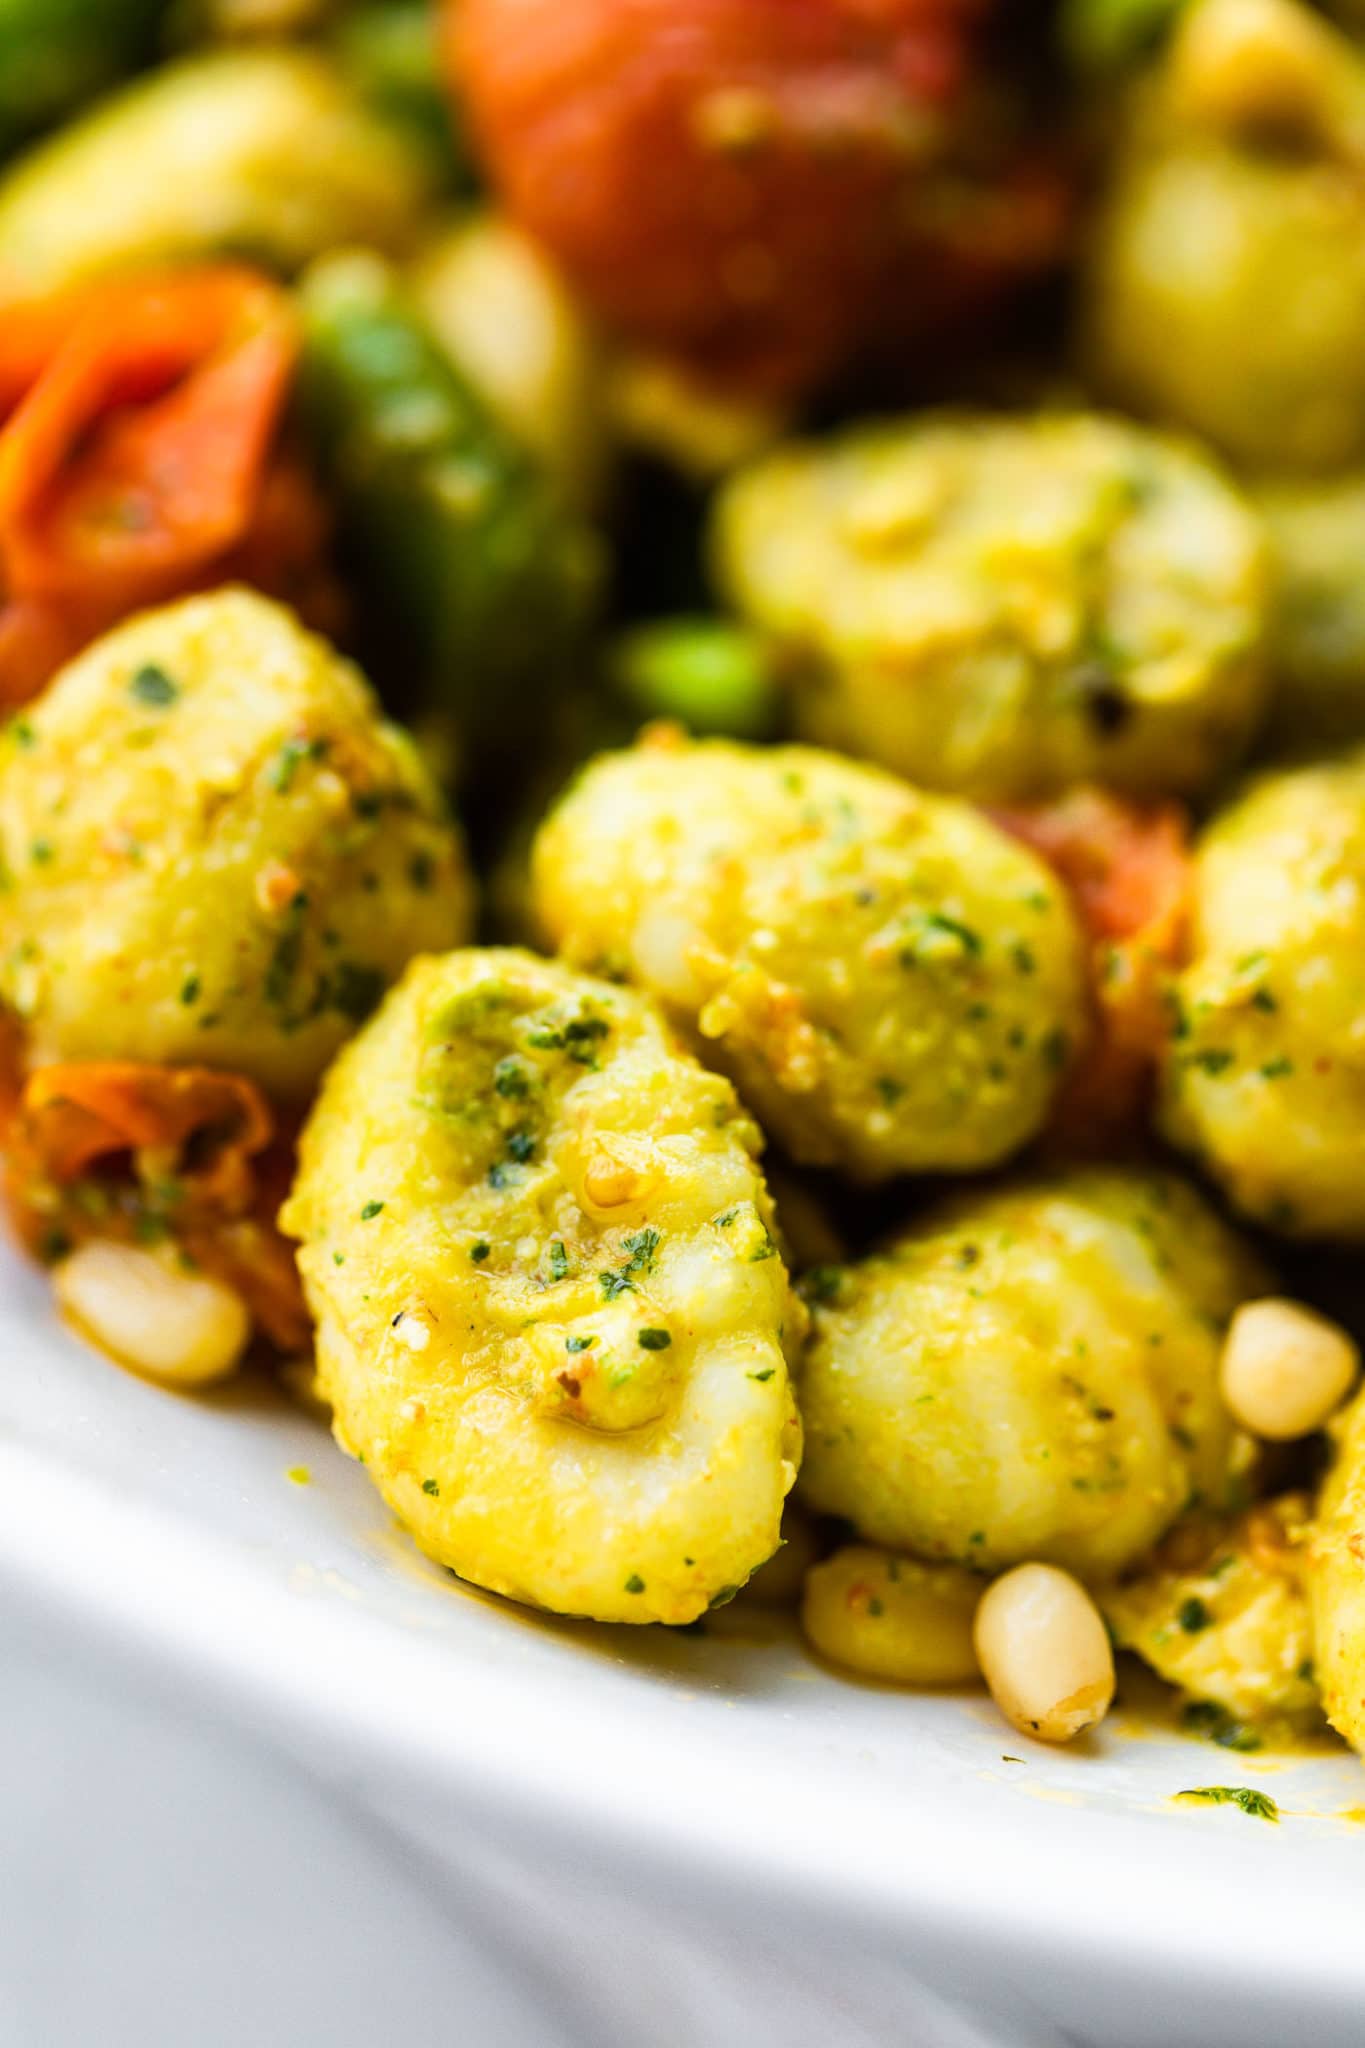 close up image of gluten free gnocchi coated with pesto in a pasta salad